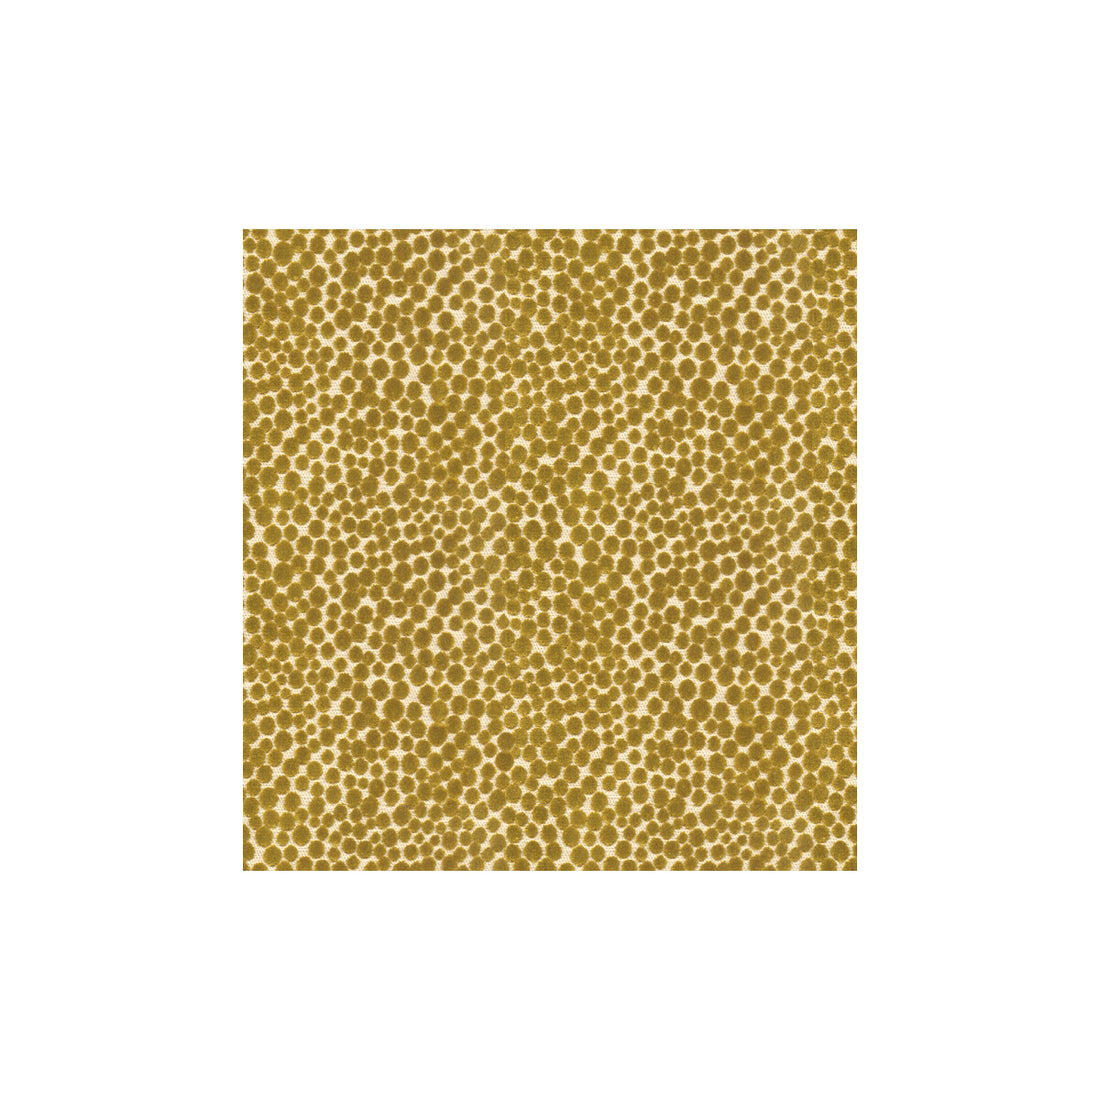 Polka Dot Plush fabric in quince color - pattern 32972.23.0 - by Kravet Couture in the Modern Colors III collection